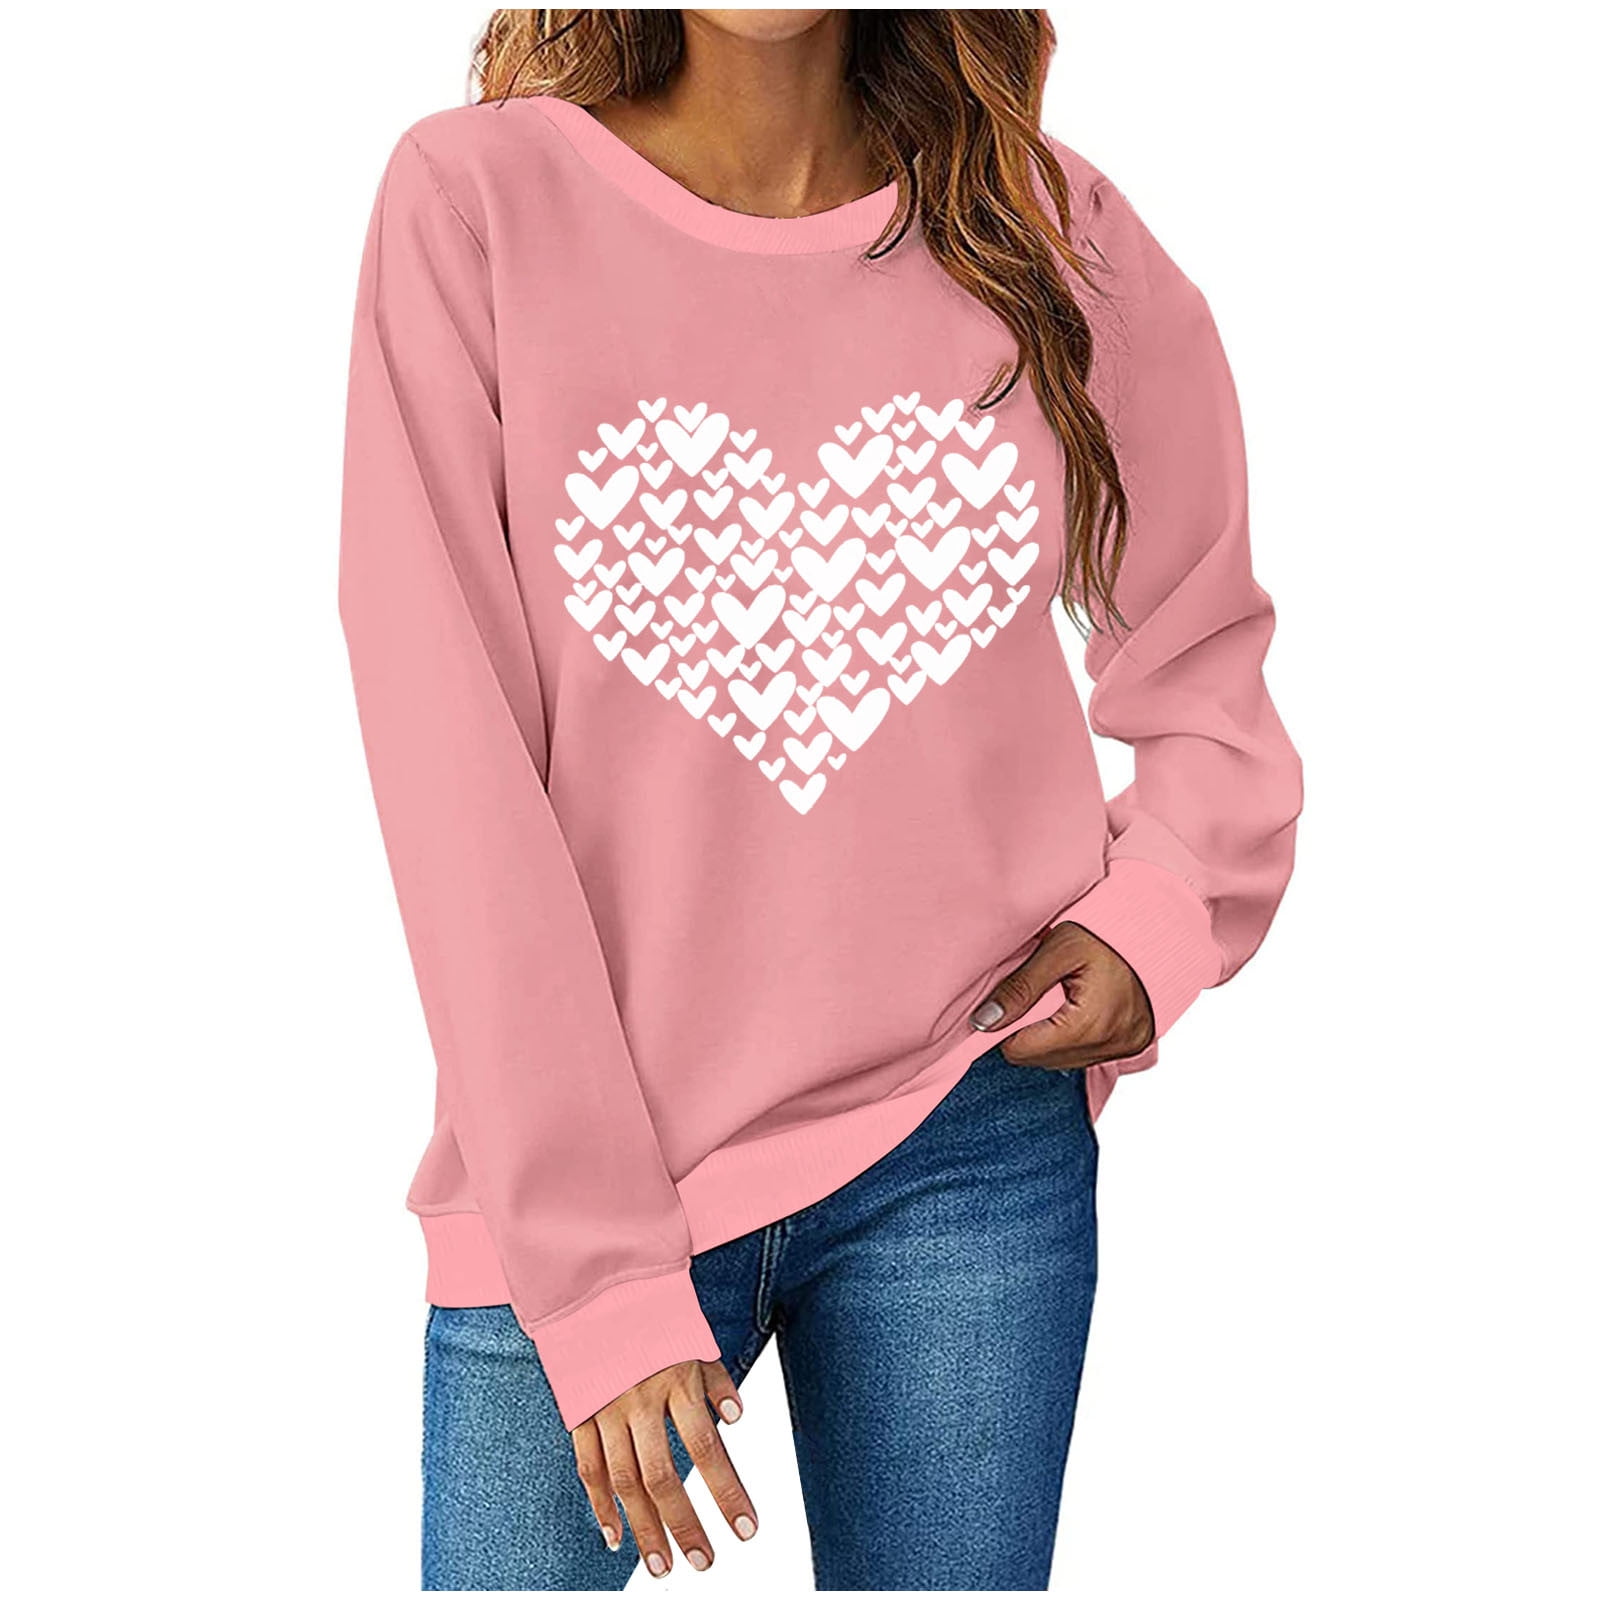 Olyvenn Clearance Valentine's Day Gifts Sweatshirts for Women Long Sleeve  Ladies Fashion Pullover Tops Love Heart Print Crew Neck Comfy Spring Trendy